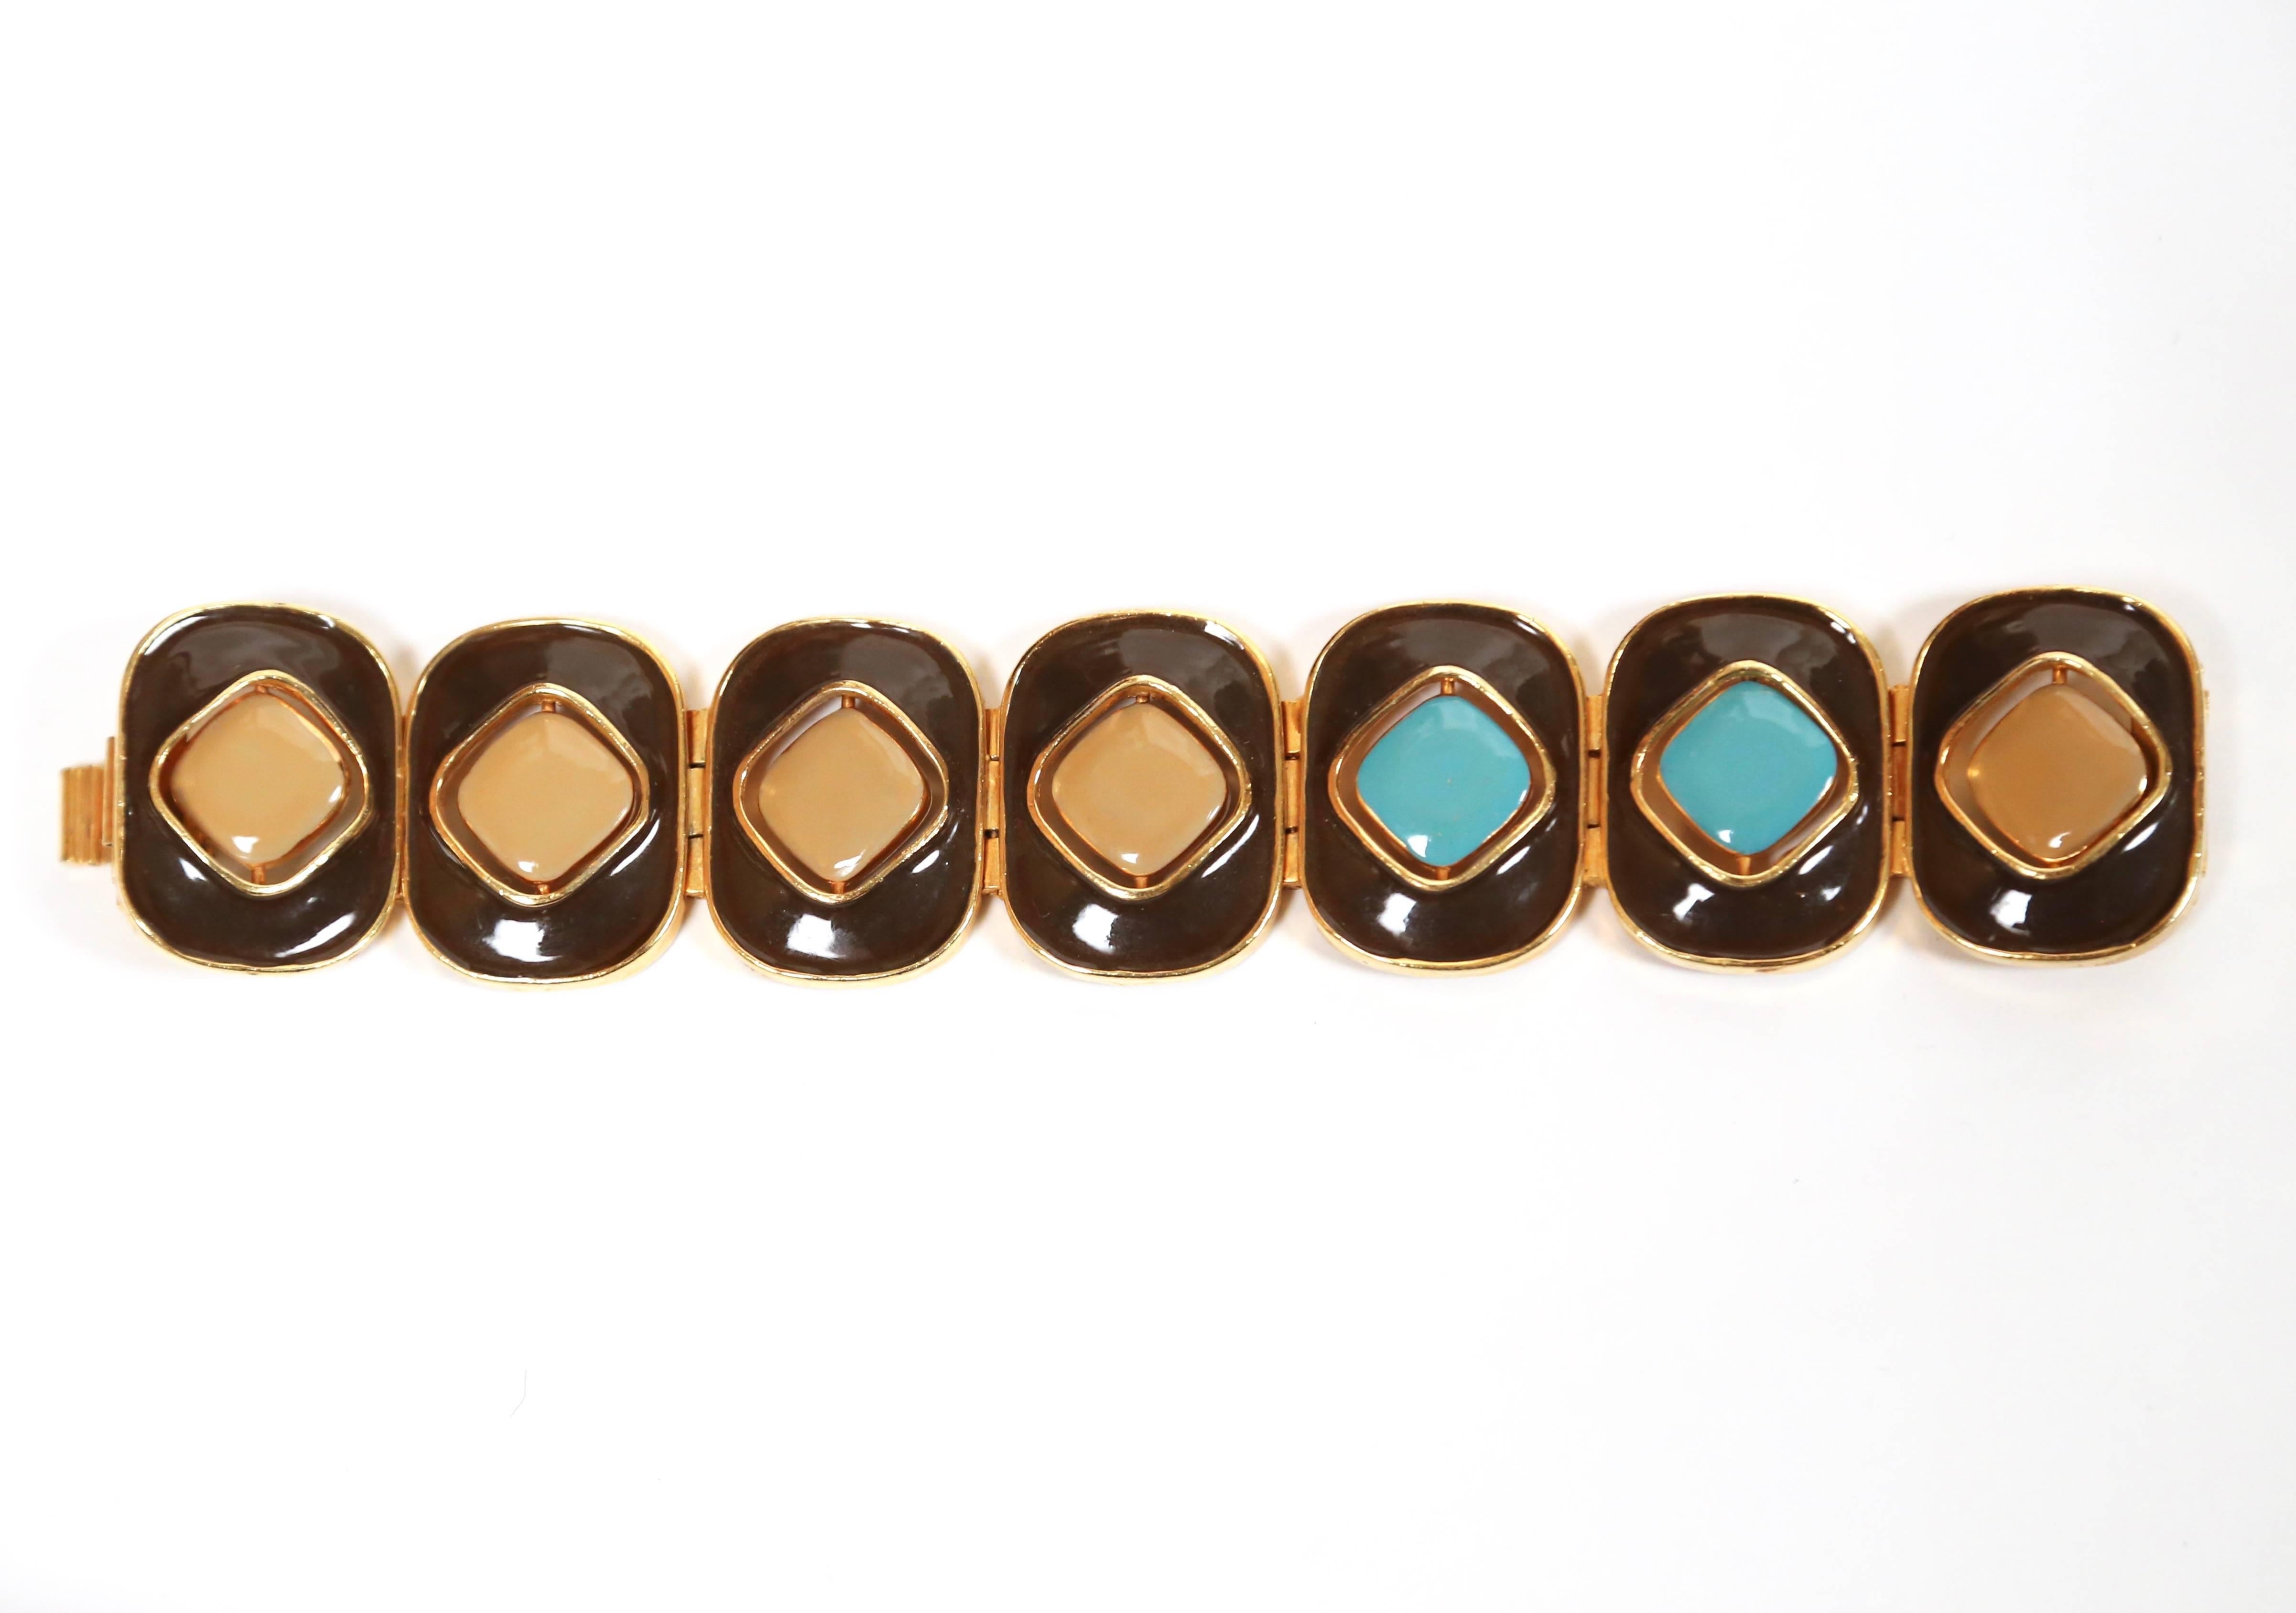 Very rare enameled brown gilt bracelet with reversible accents from Pierre Cardin dating to the 1960's. Measures approximately: 1.5" wide by 7" long. Fits a small to medium wrist. Enameled pieces reverse so that bracelet can be worn with